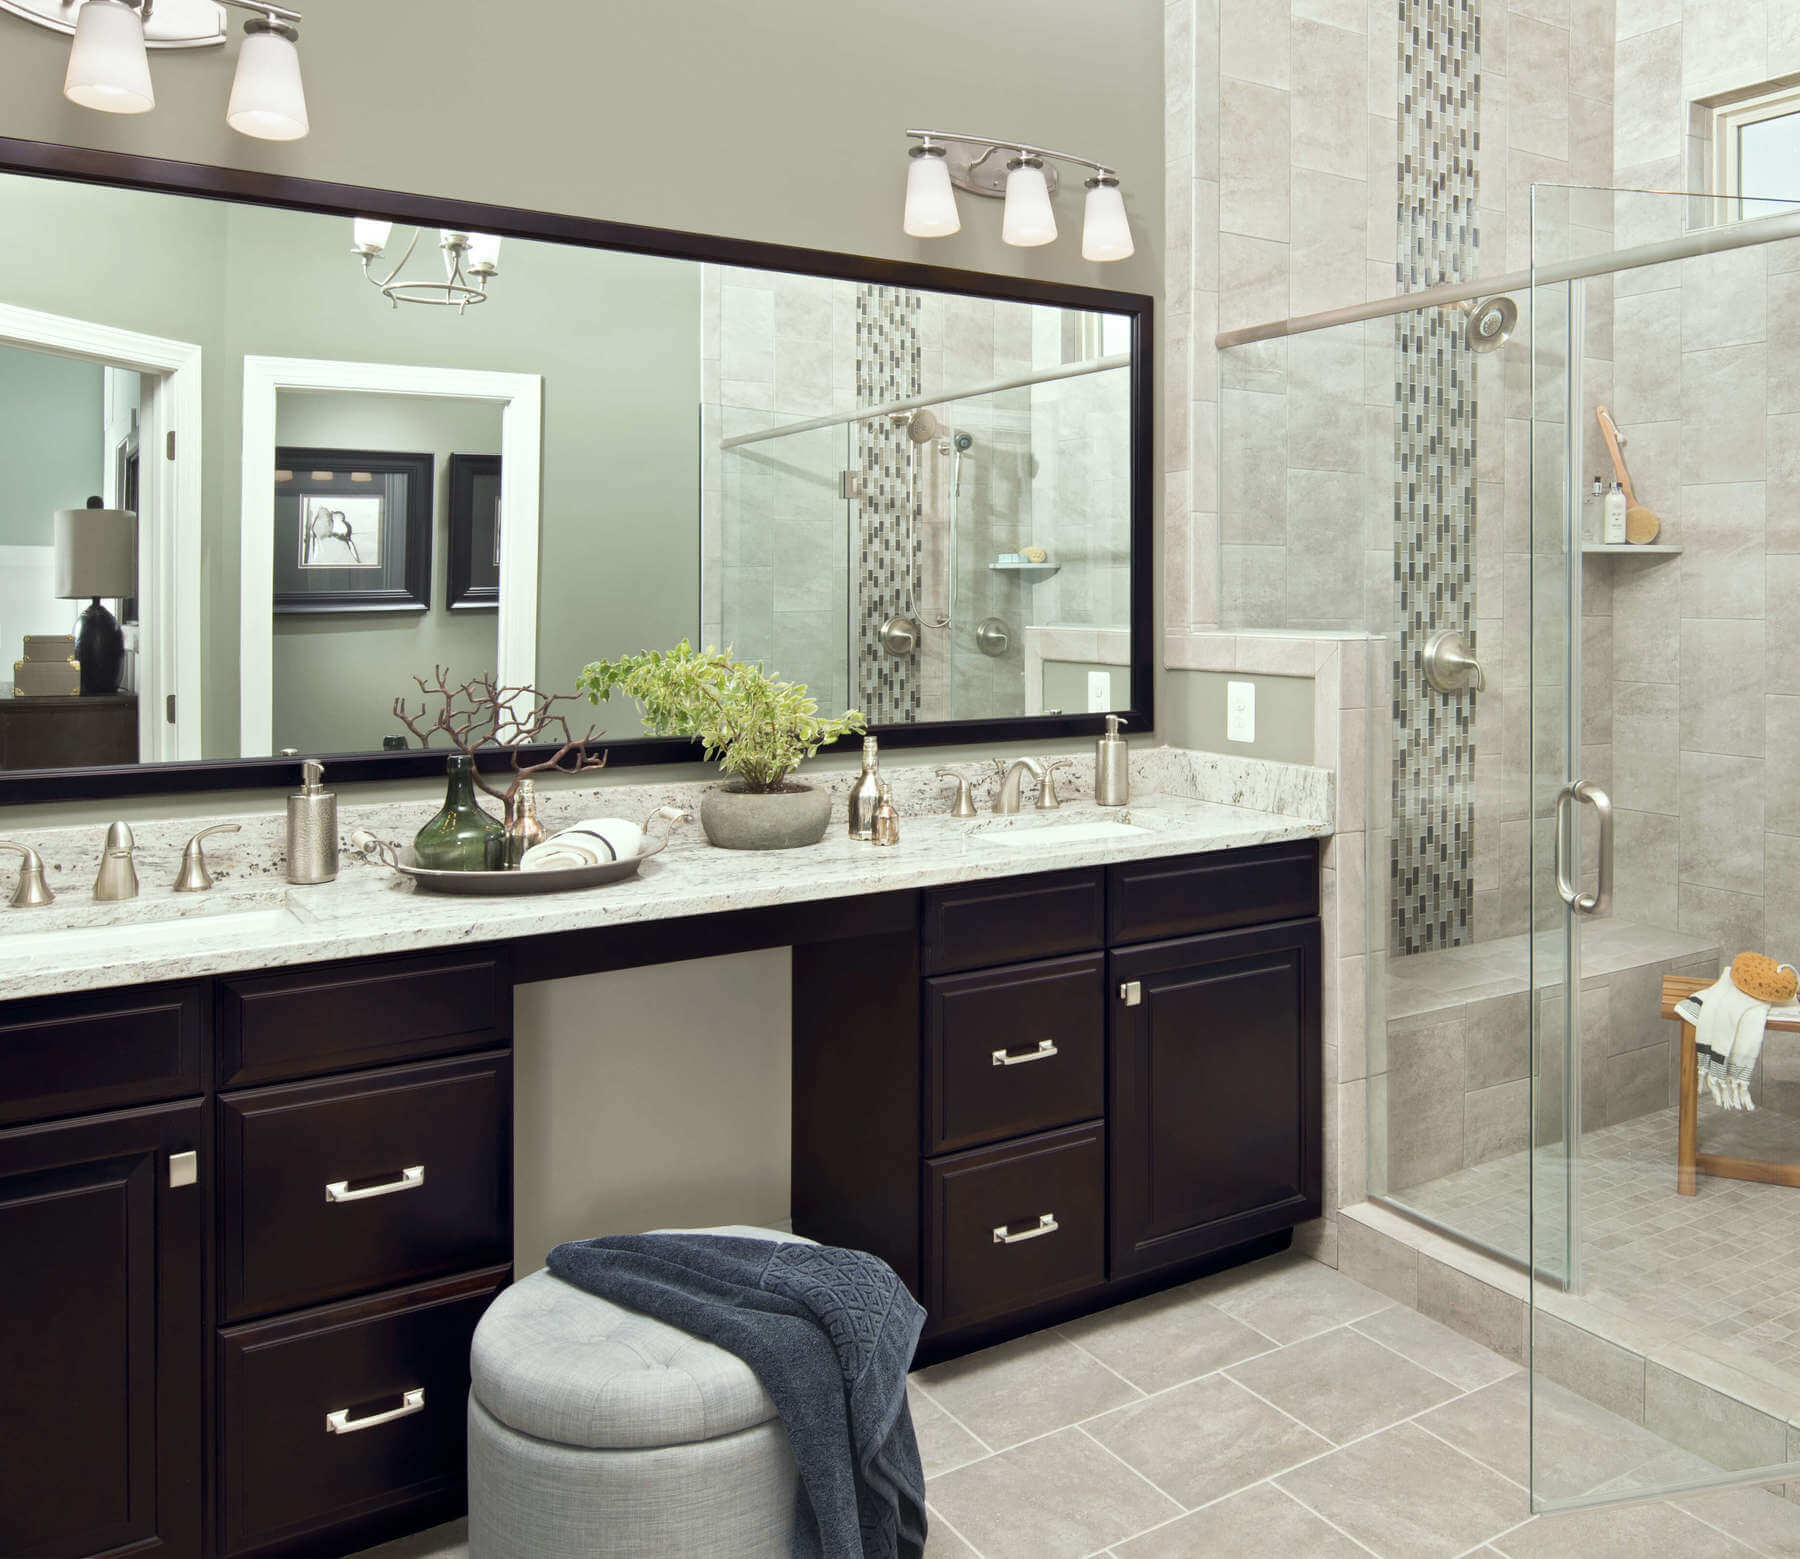 Quality Remodeling Products | Tiles, Sinks, Faucets & More